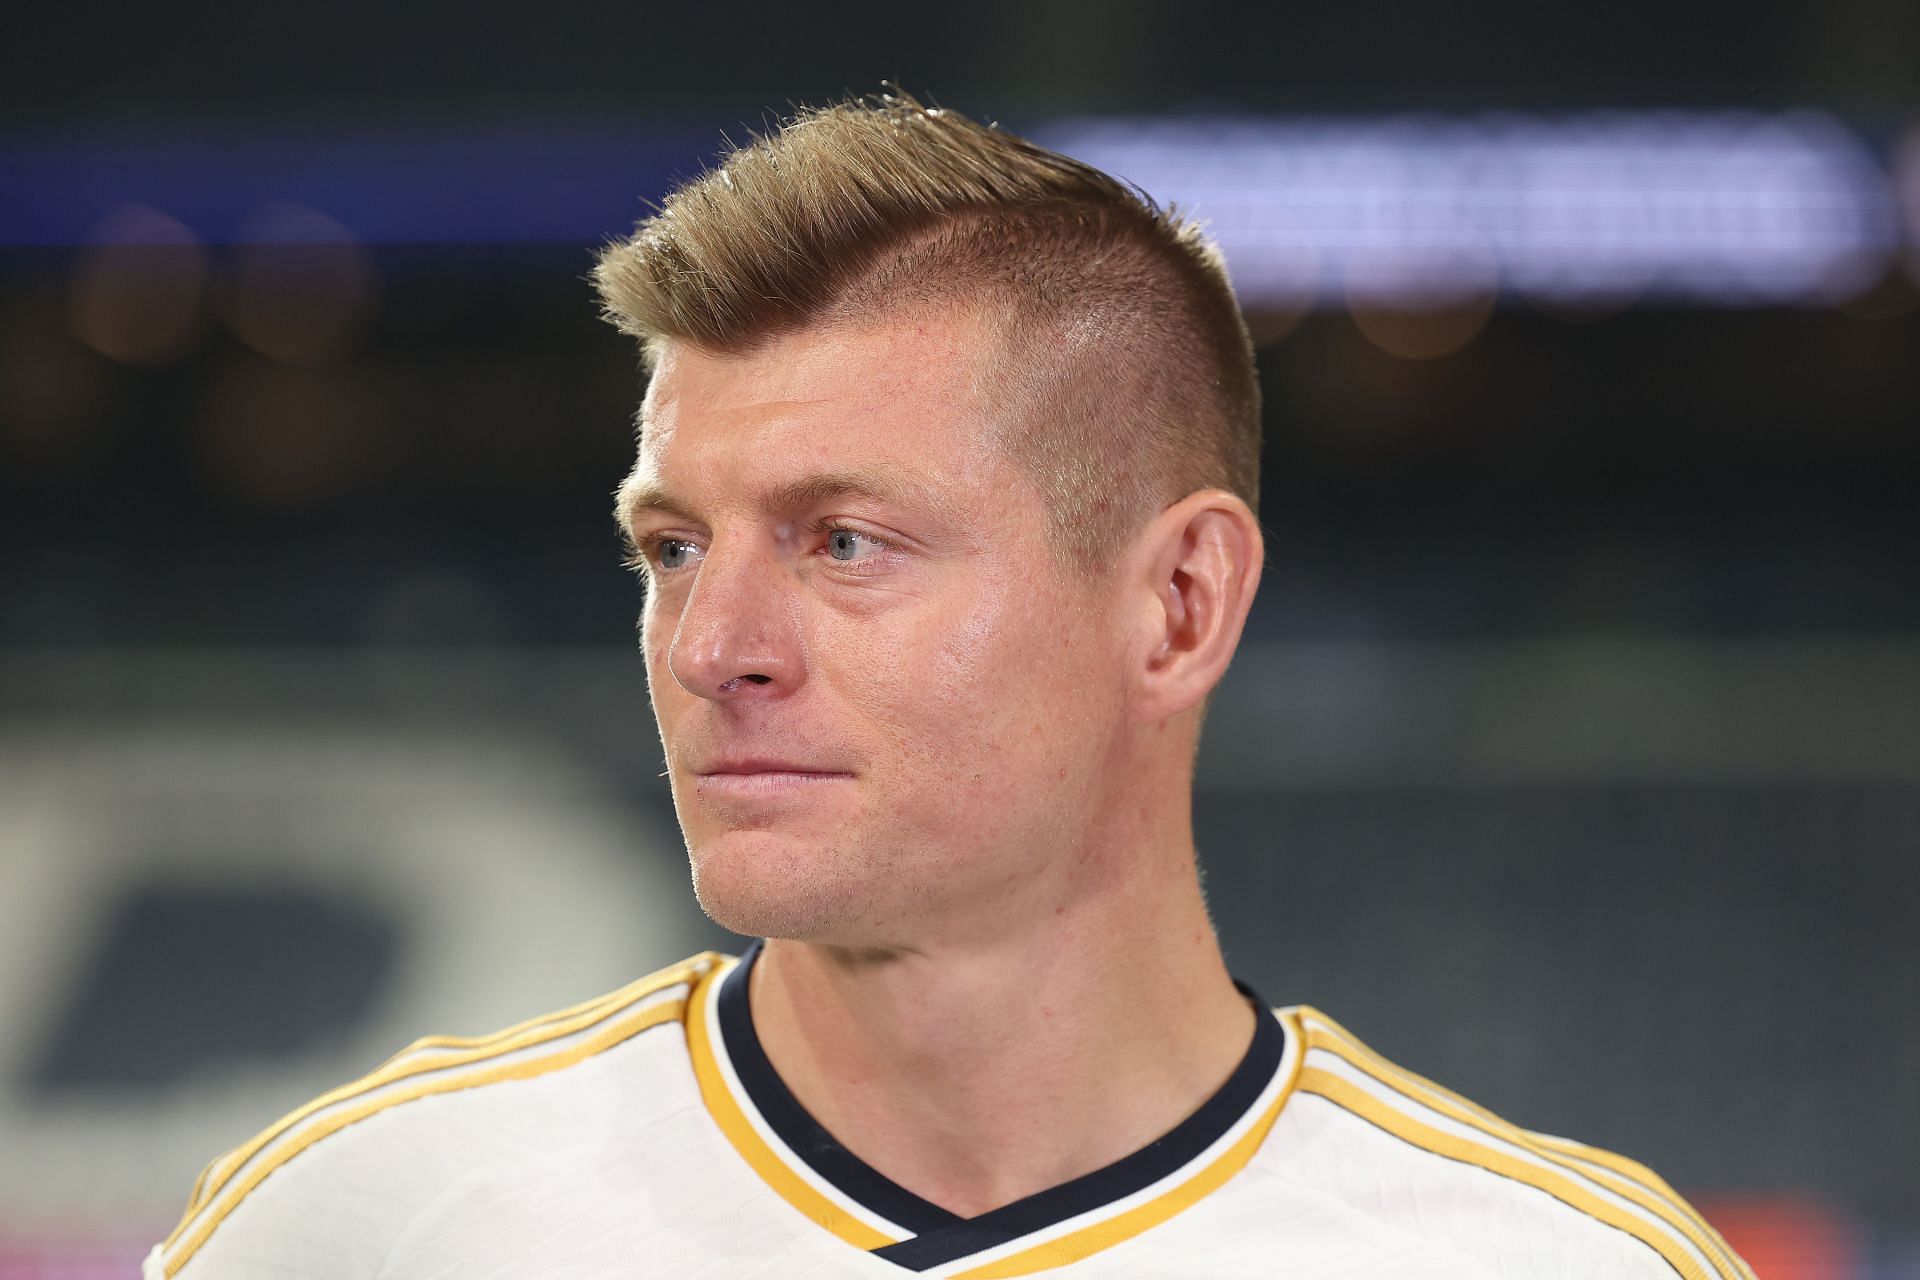 Real Madrid midfielder Toni Kroos moves up in 2024 Ballon d’Or odds